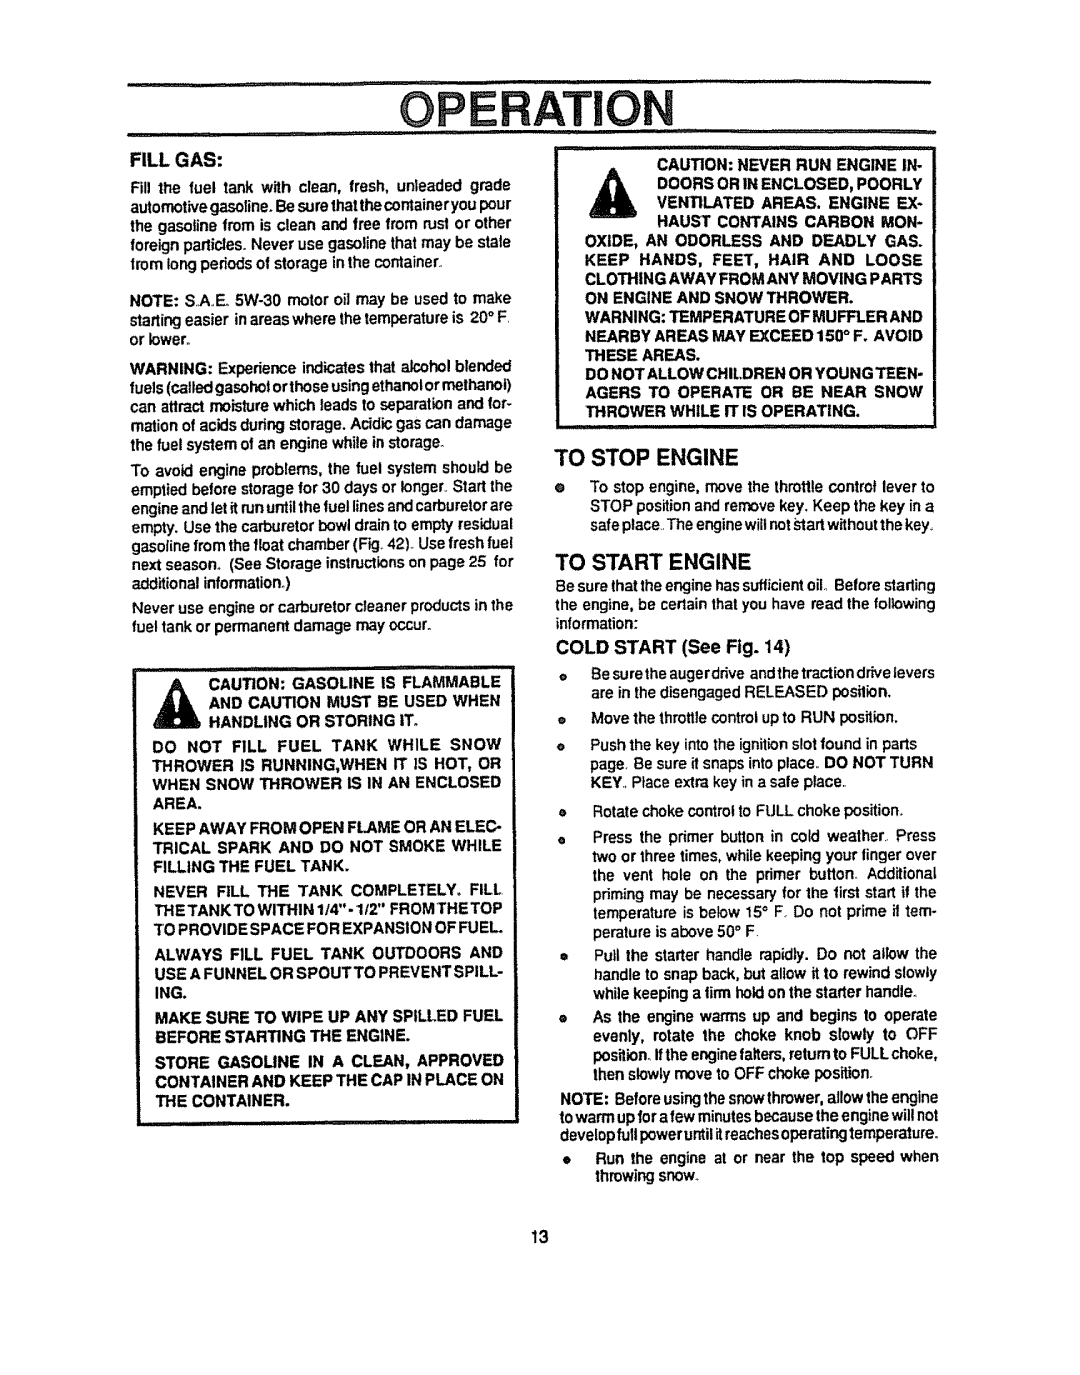 Sears 536.884821 manual To Stop Engine, To Start Engine 